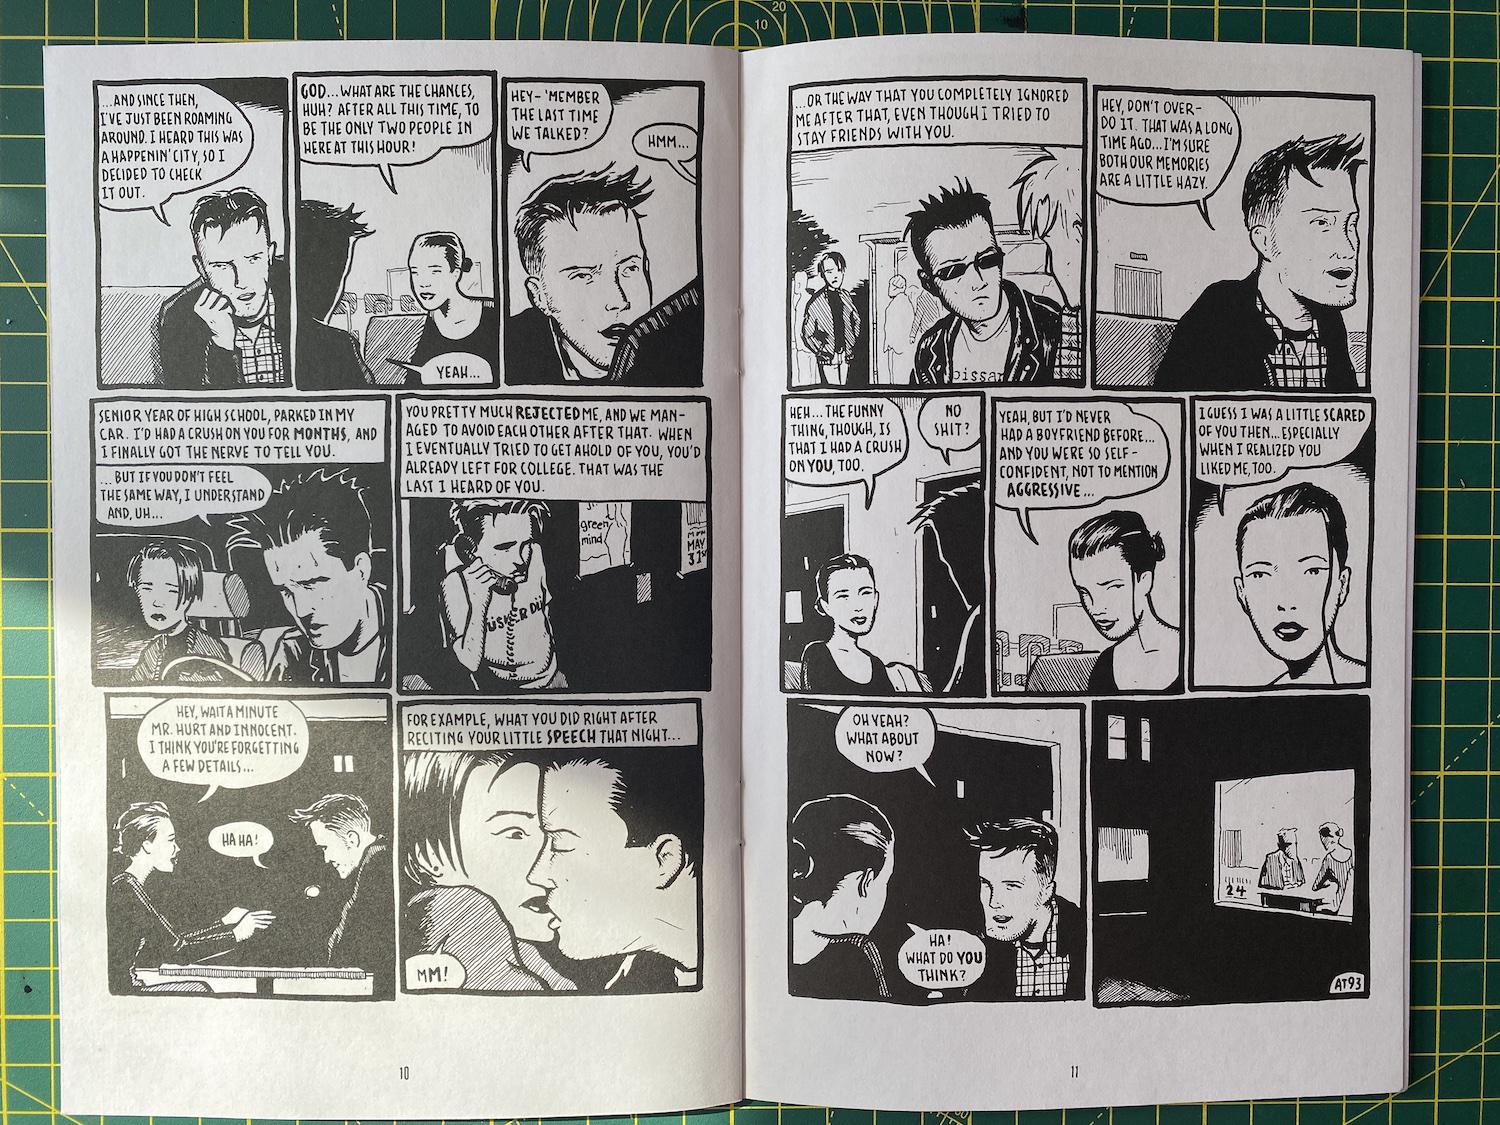 A page from Optic Nerve by Adrian Tomine